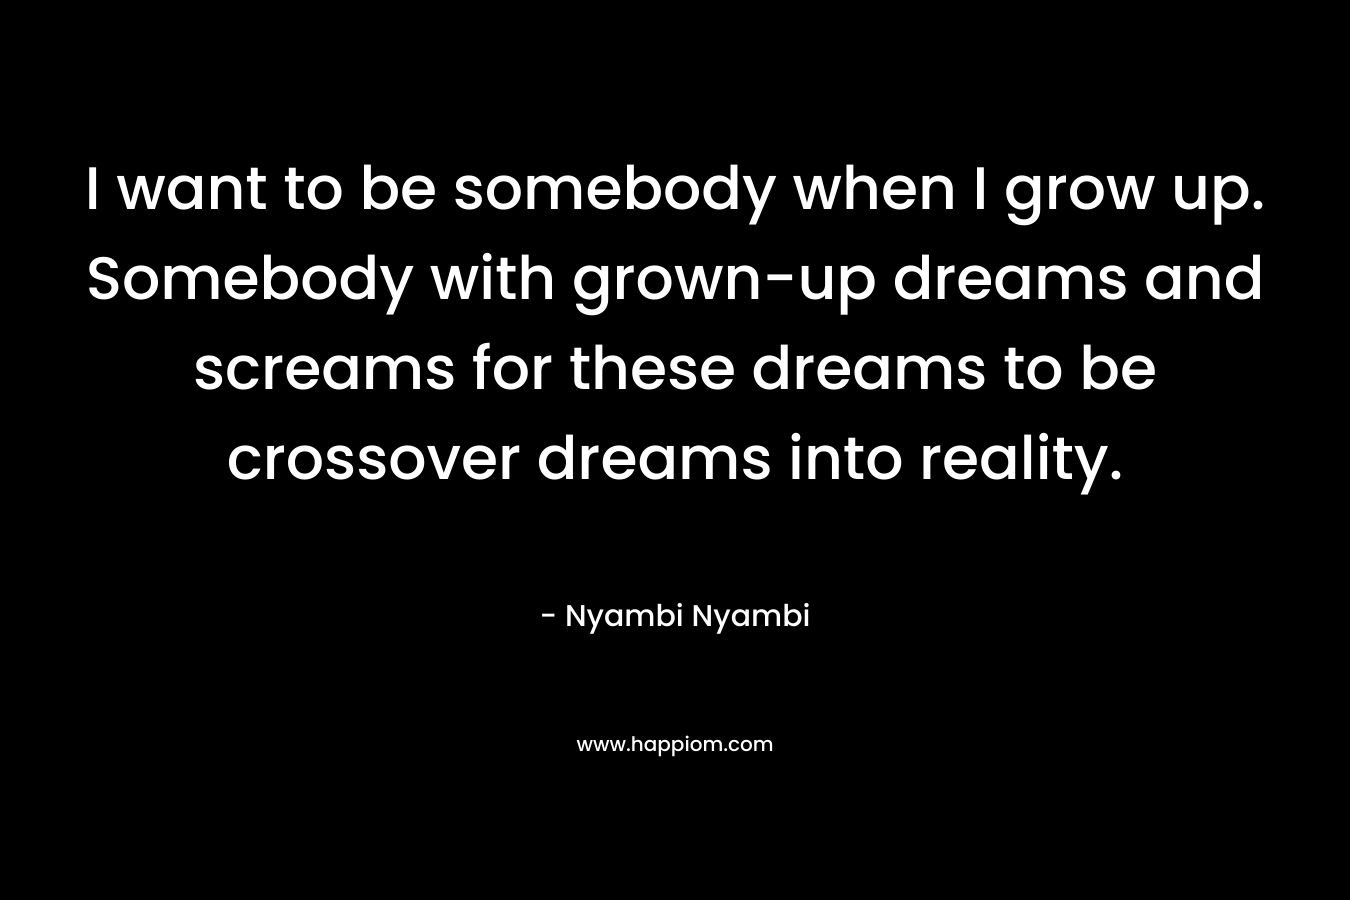 I want to be somebody when I grow up. Somebody with grown-up dreams and screams for these dreams to be crossover dreams into reality. – Nyambi Nyambi